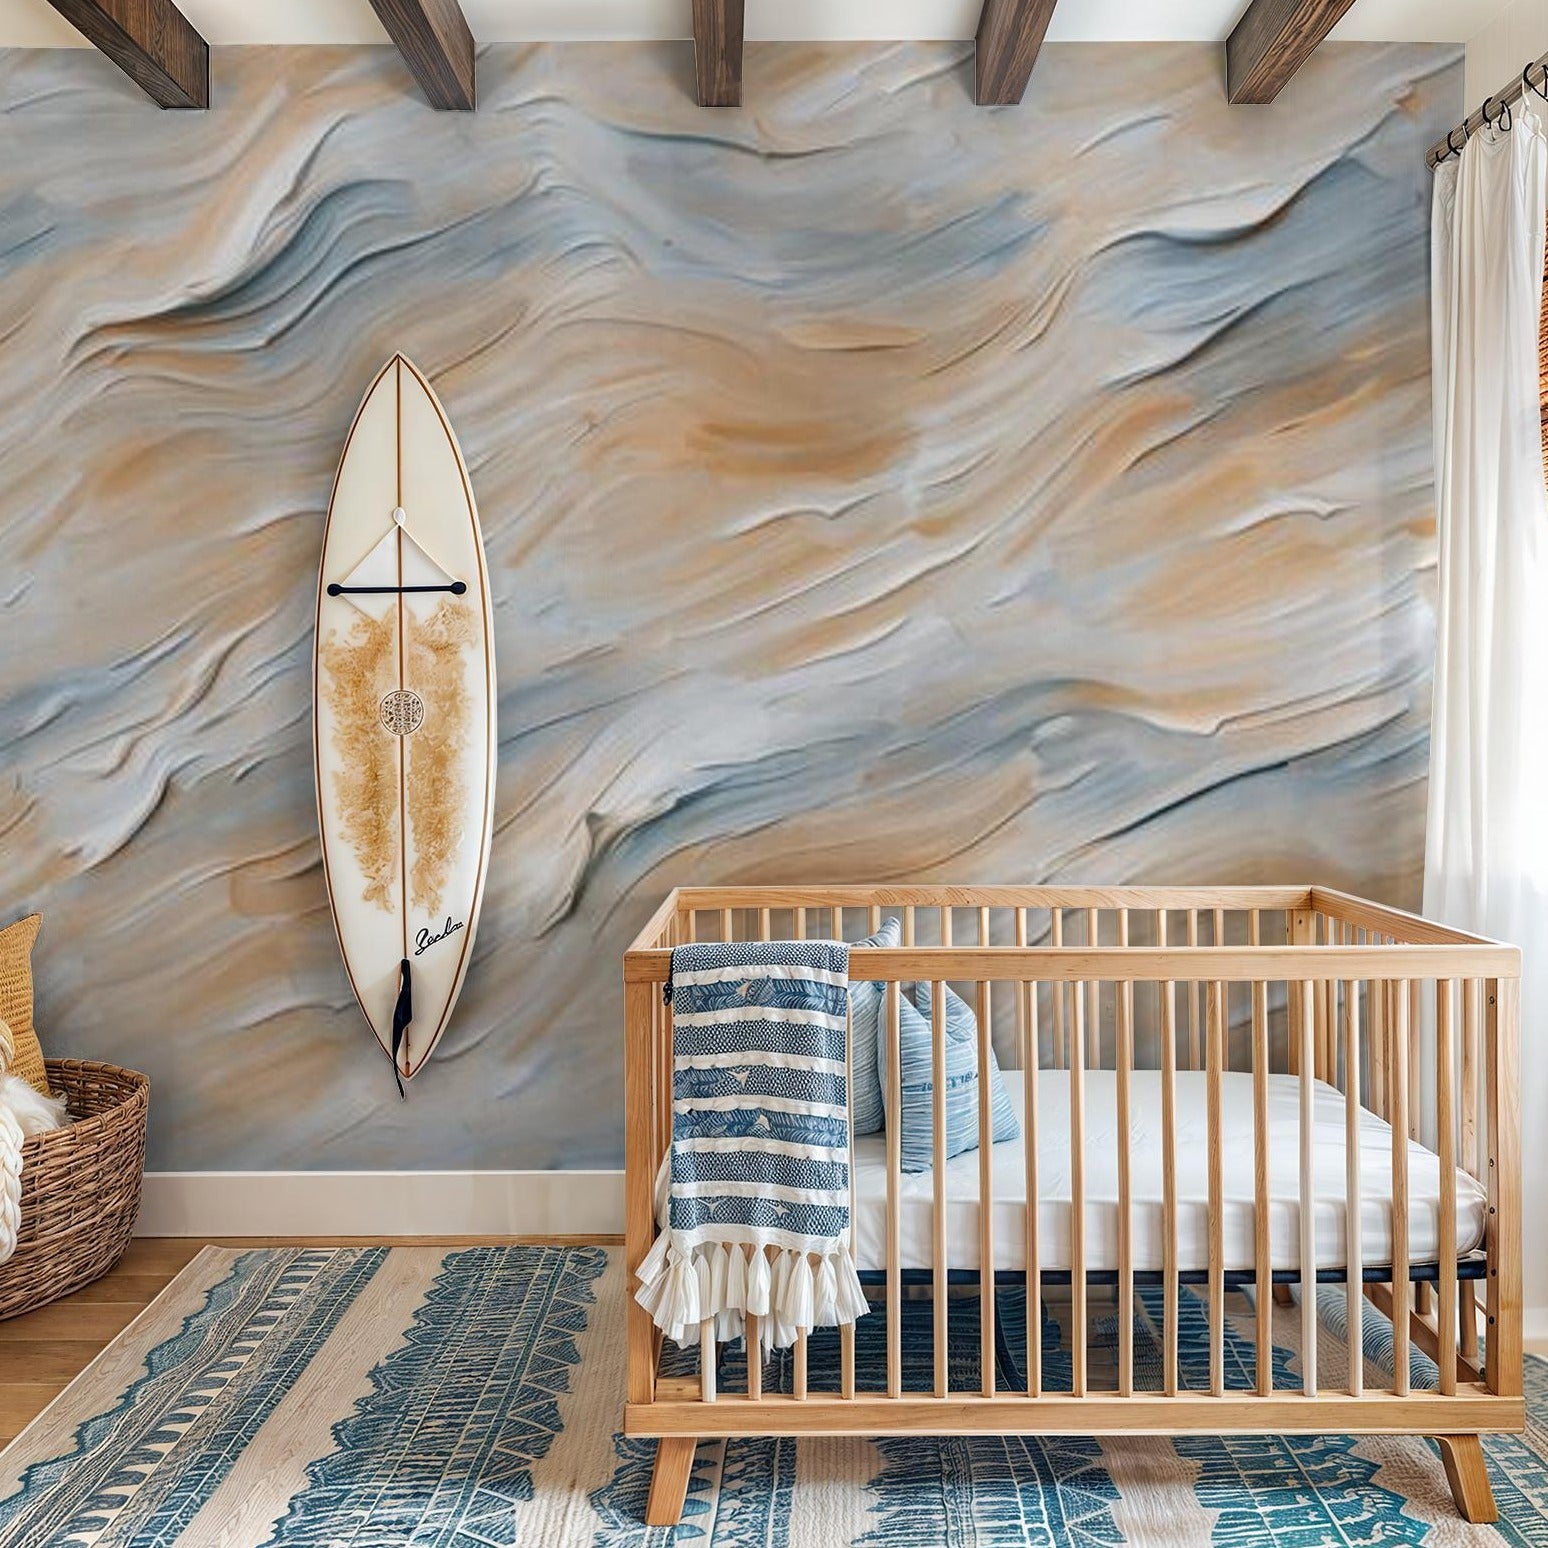 "Coastal Drift Wallpaper by Wall Blush in a stylish nursery with surfboard and wooden crib focus."